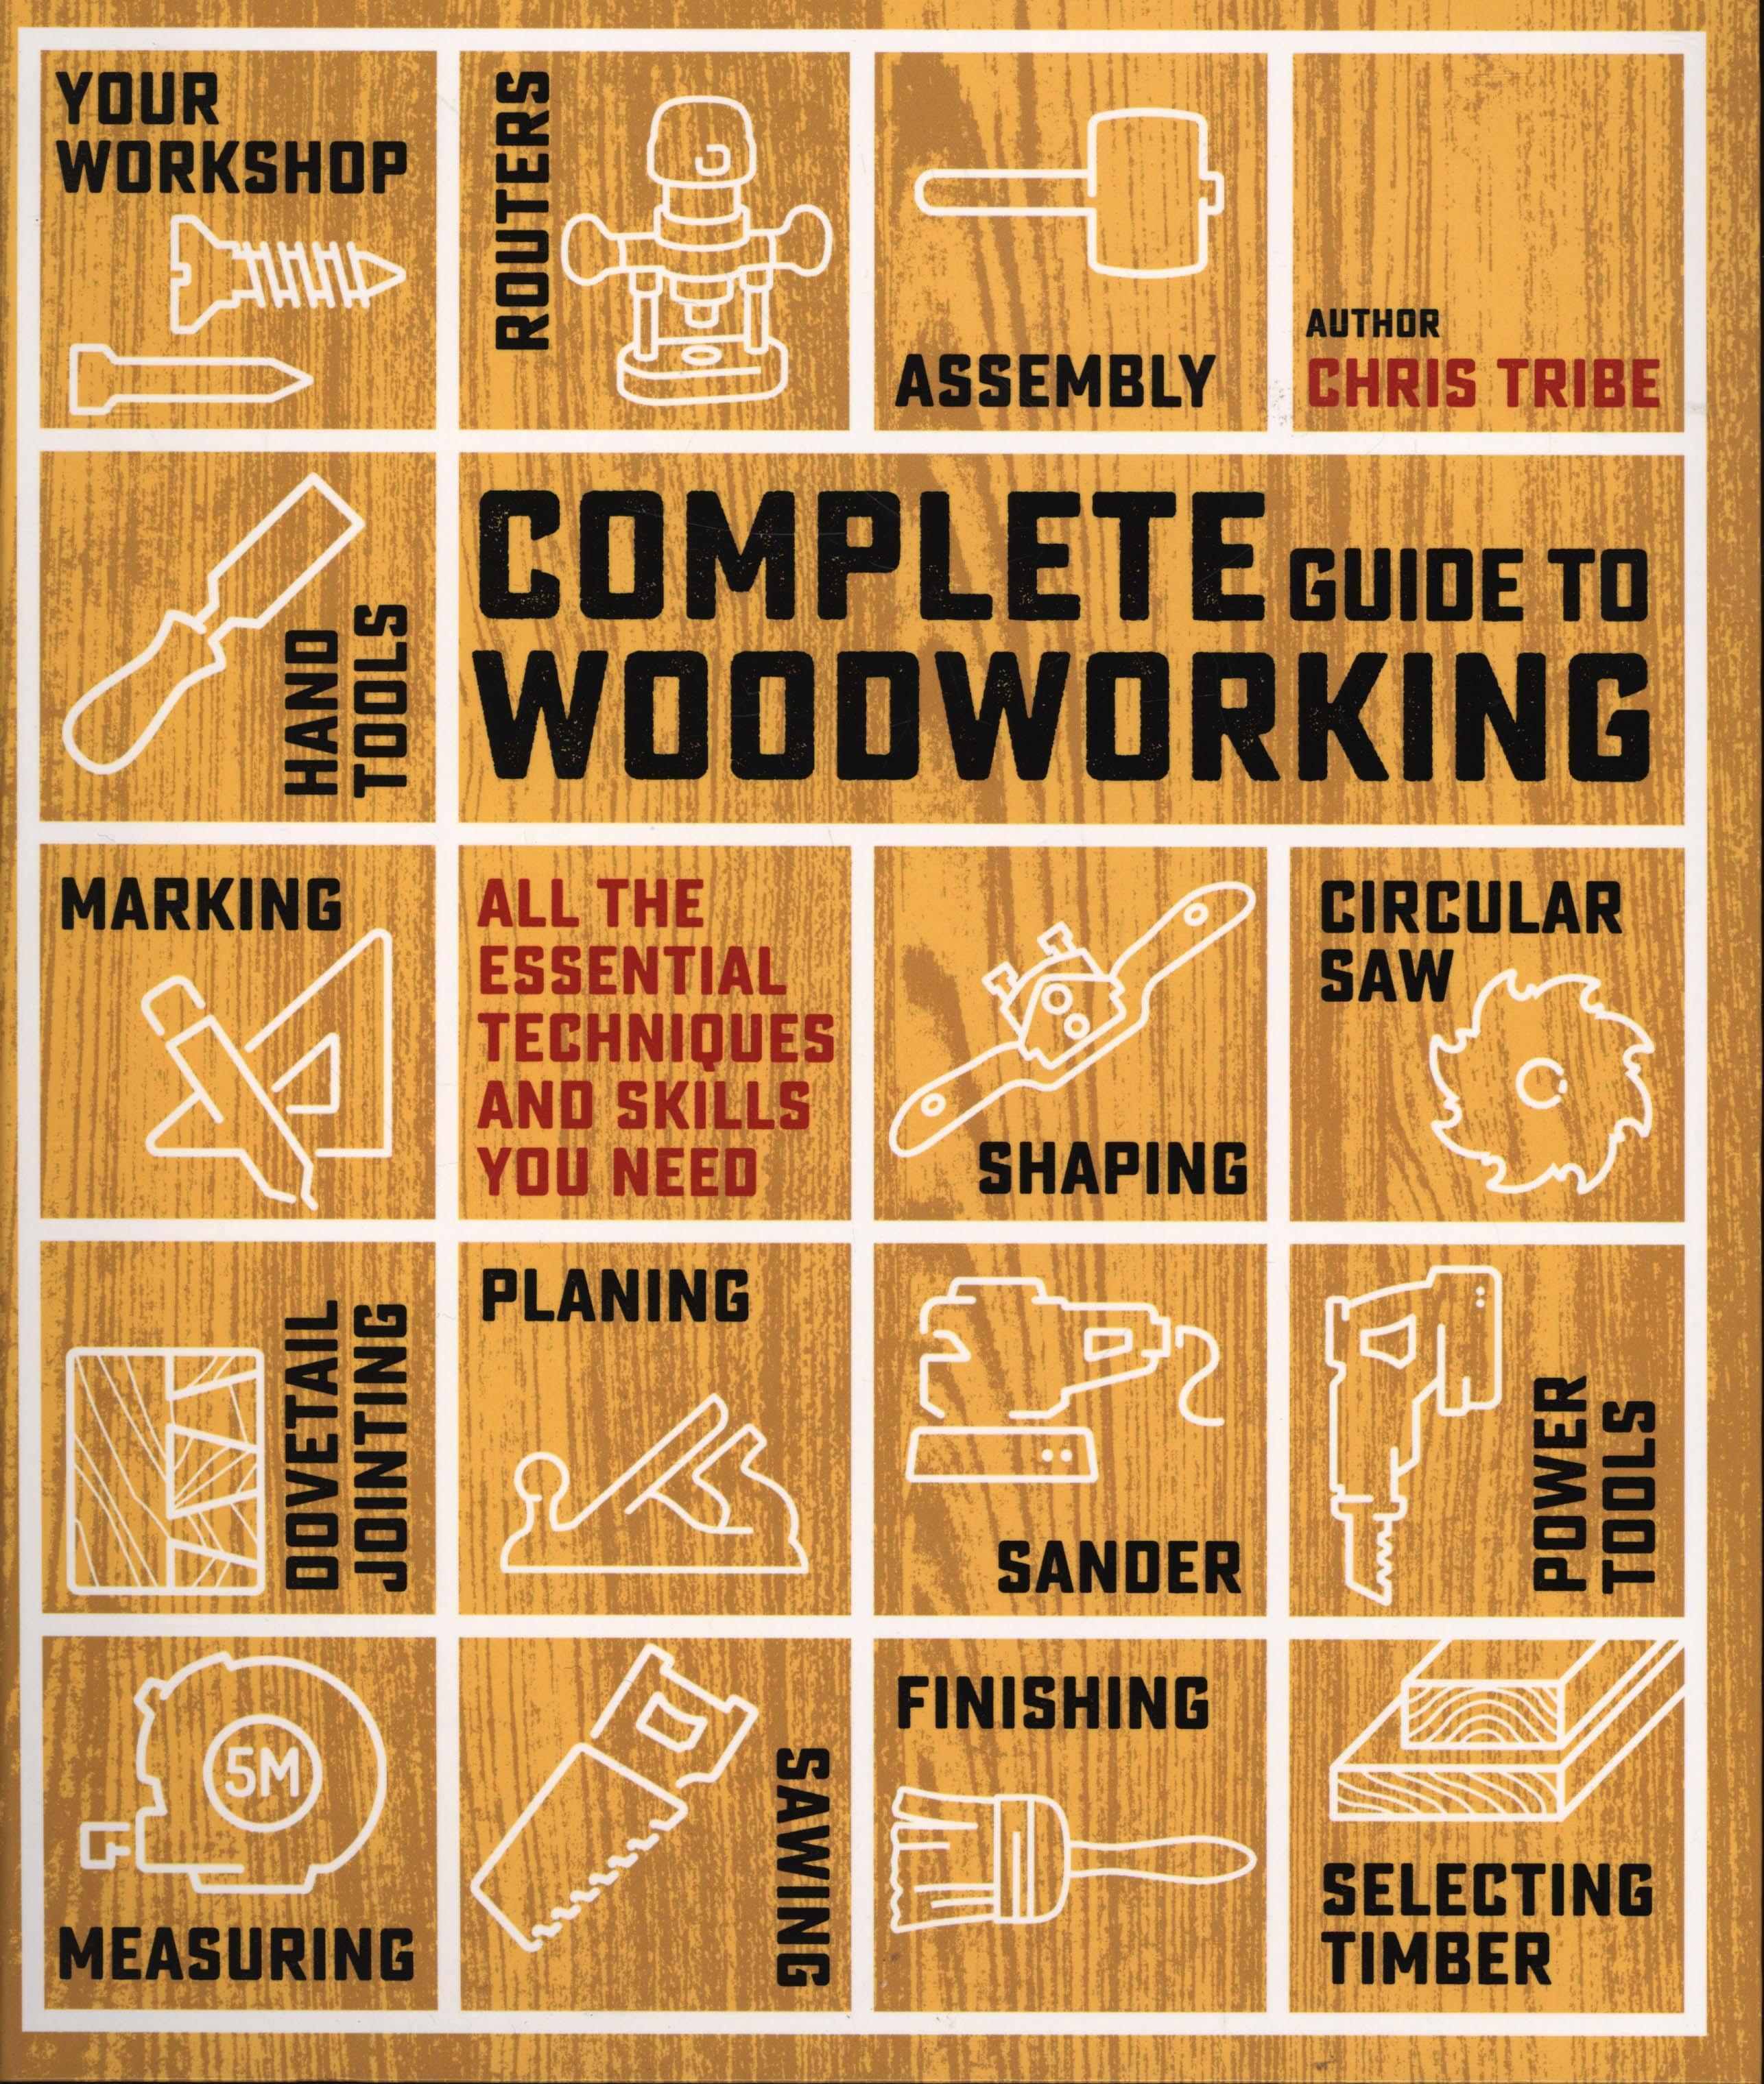 Complete Guide to Woodworking - Chris Tribe